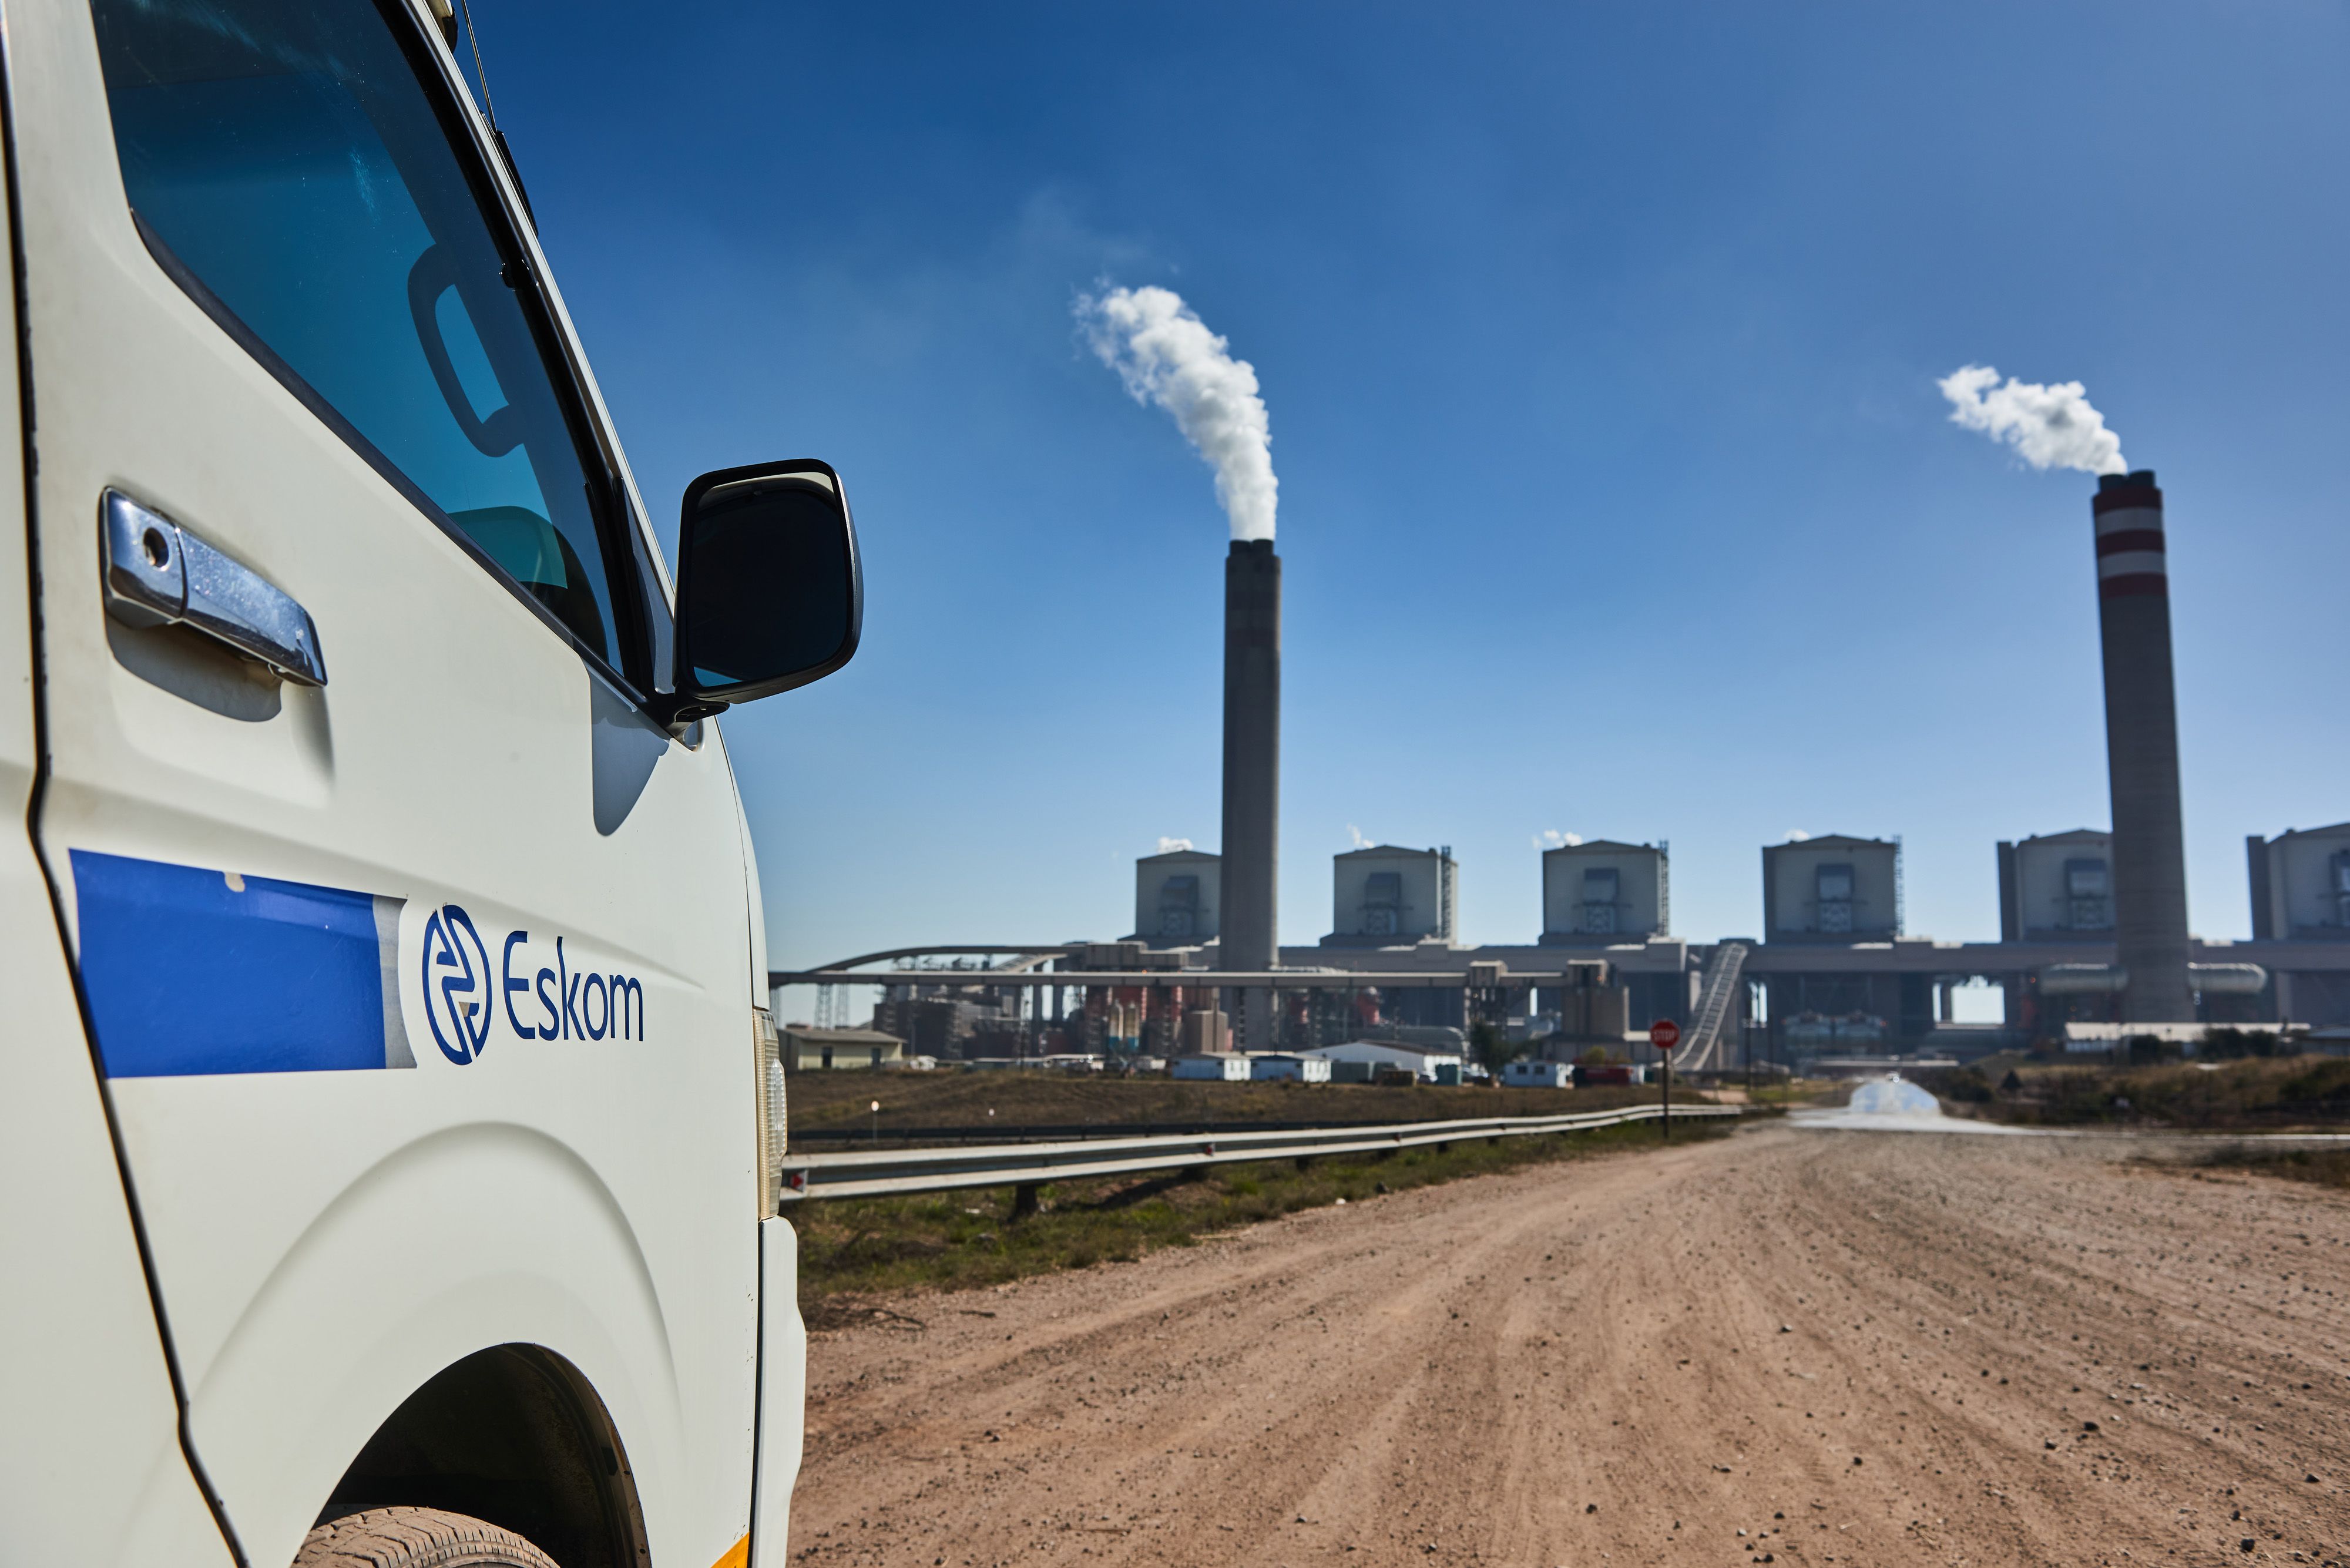 The Kusile coal-fired power station, operated by Eskom Holdings SOC Ltd., in Delmas, South Africa, on June 8. Image: Bloomberg